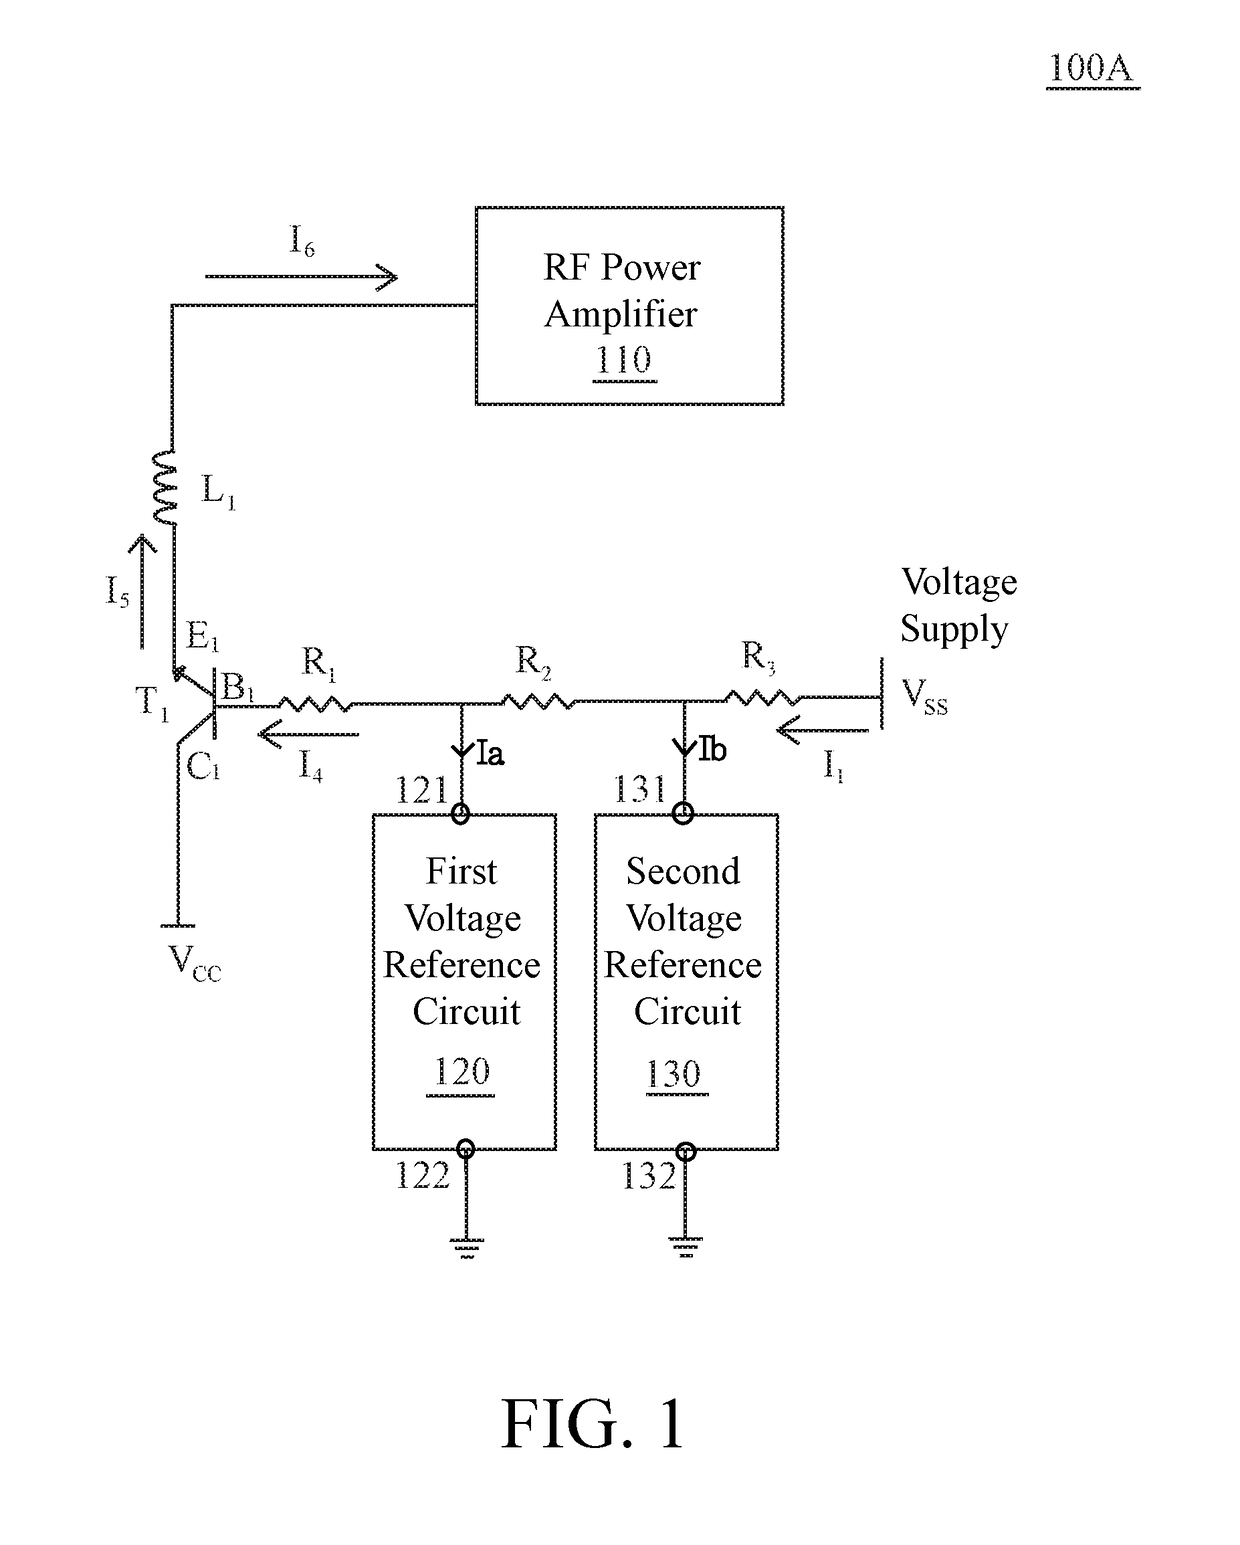 Bias circuit for supplying a bias current to a RF power amplifier